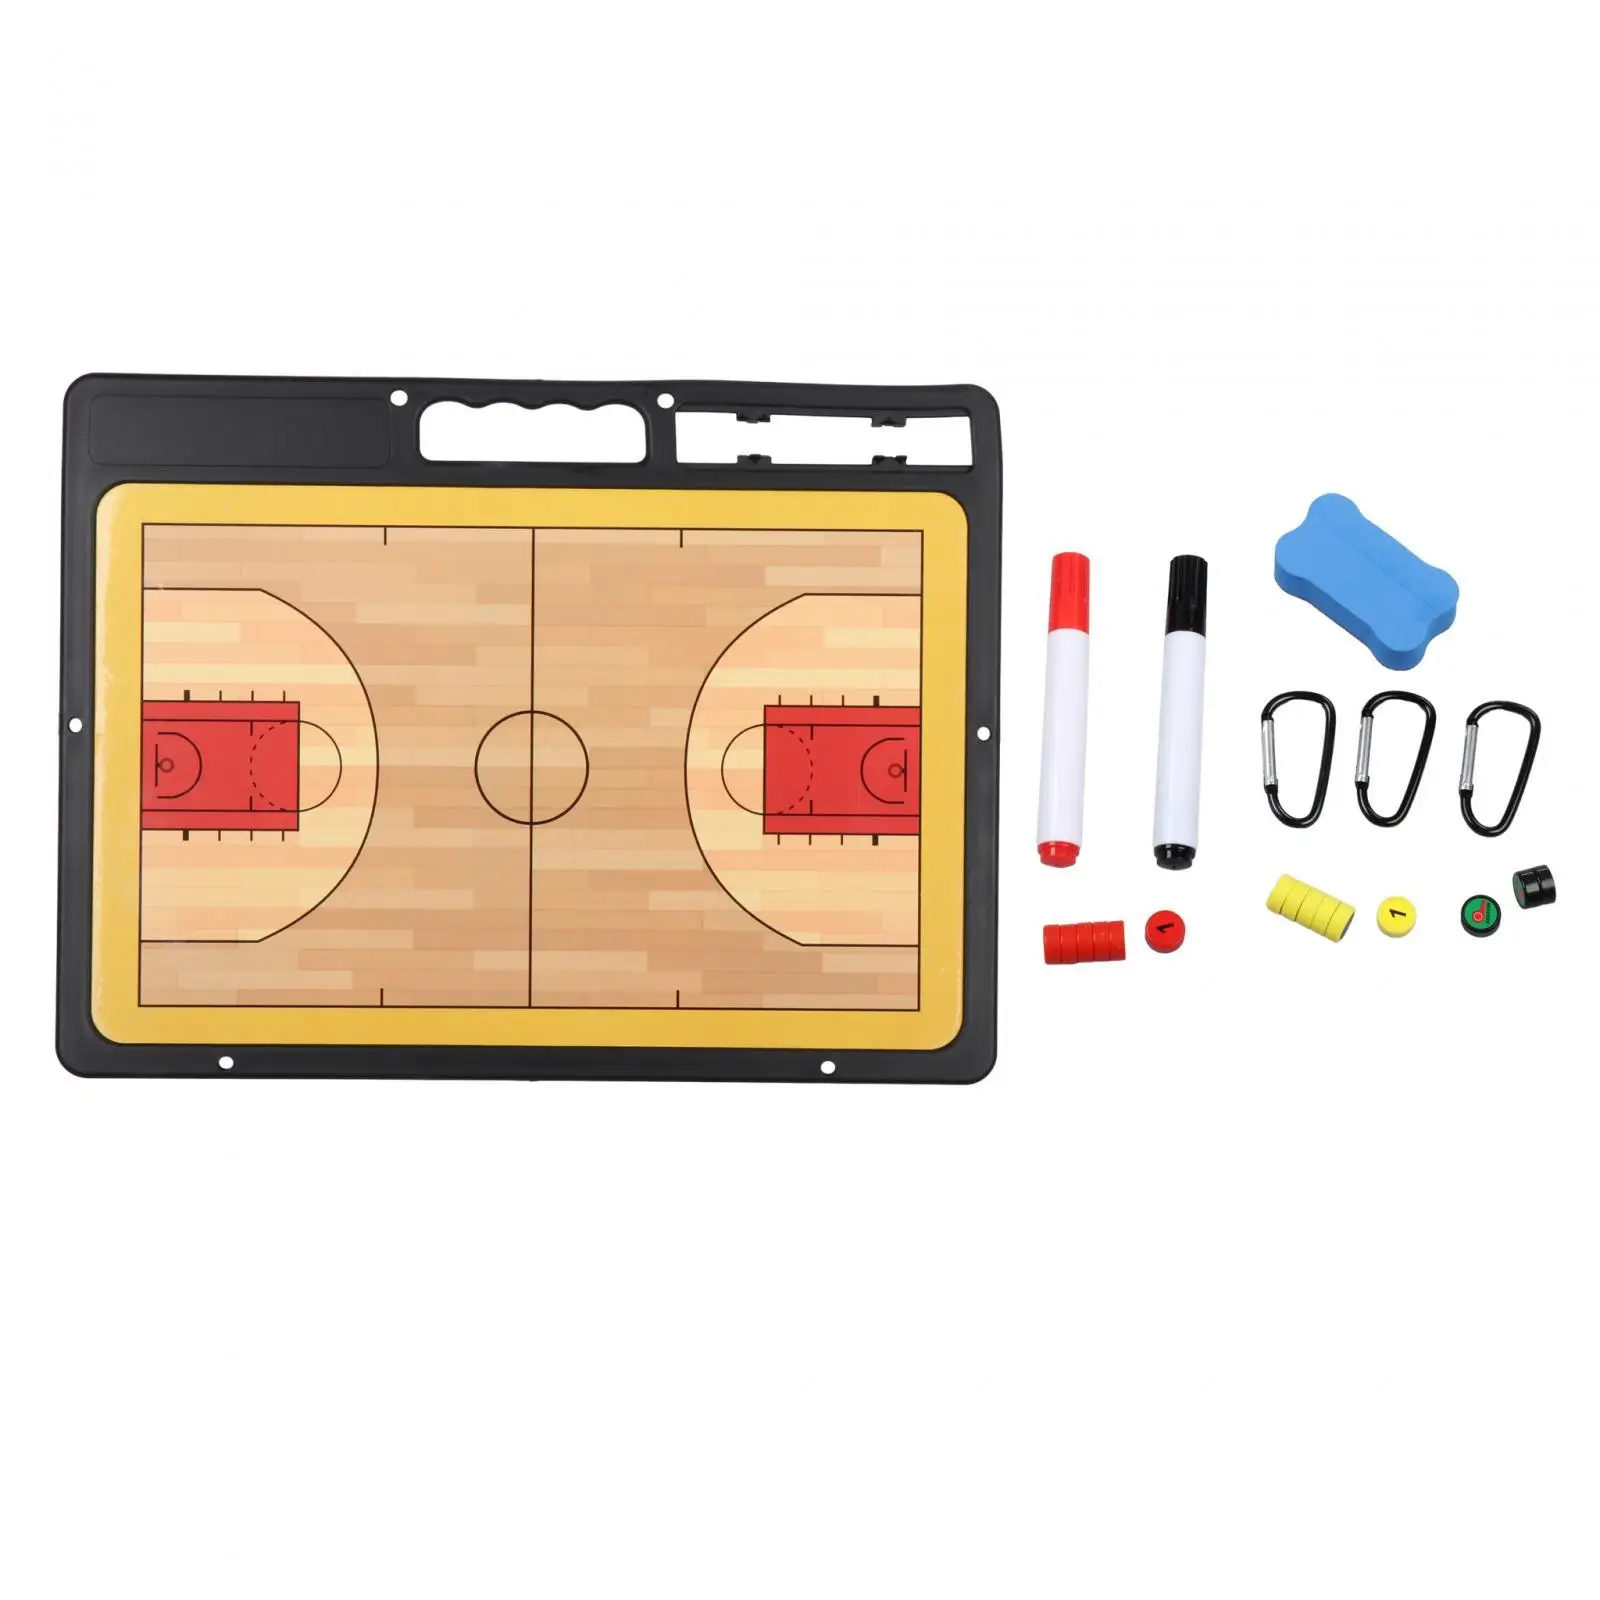 

Basketball Coaching Boards Practice Board Portable Reusable Volleyball Teaching Assistant Game 35x42cm Coaches Marker Whiteboard